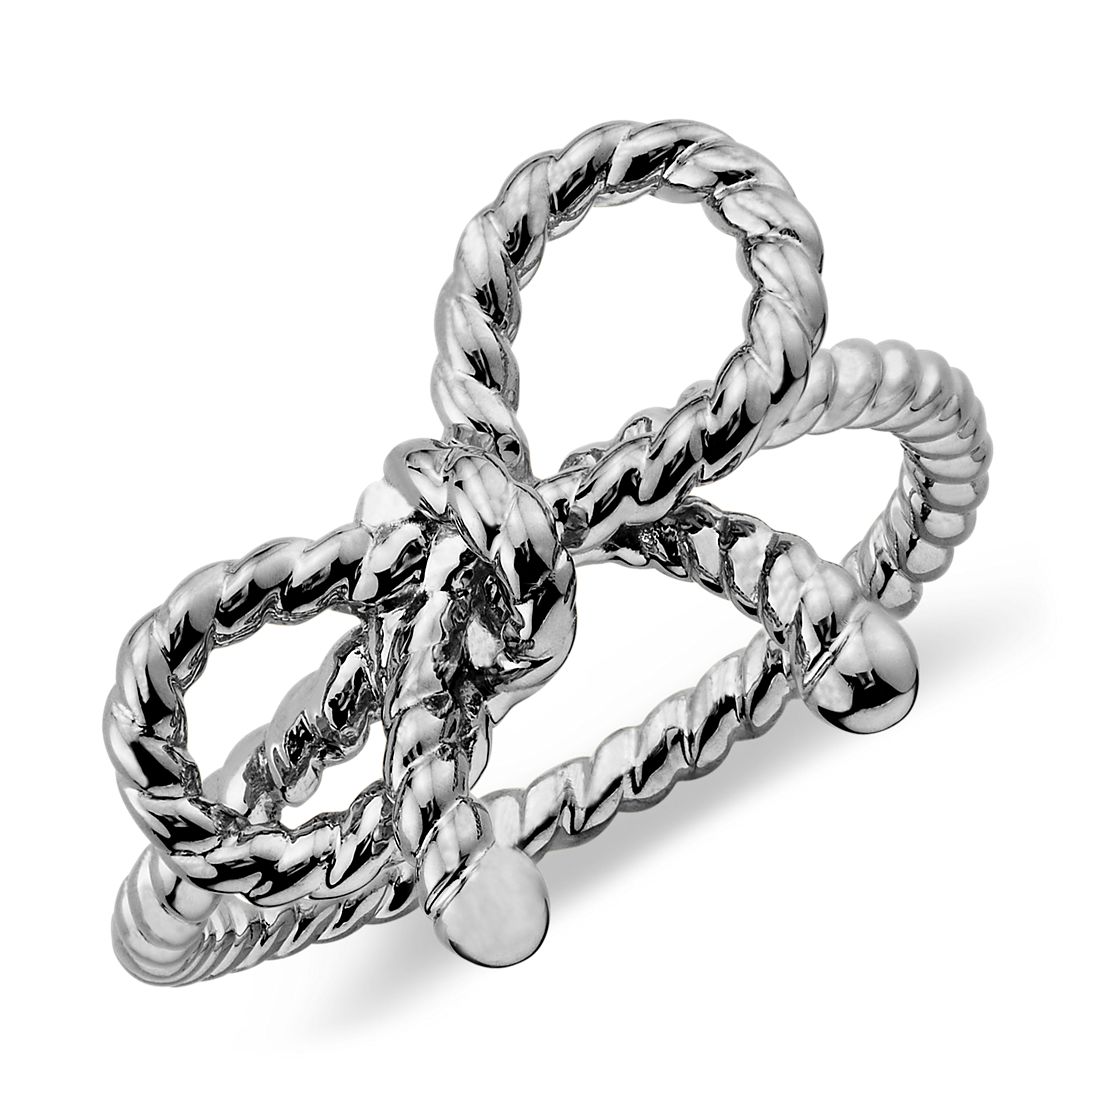 Forget-Me-Knot Ring in Sterling Silver